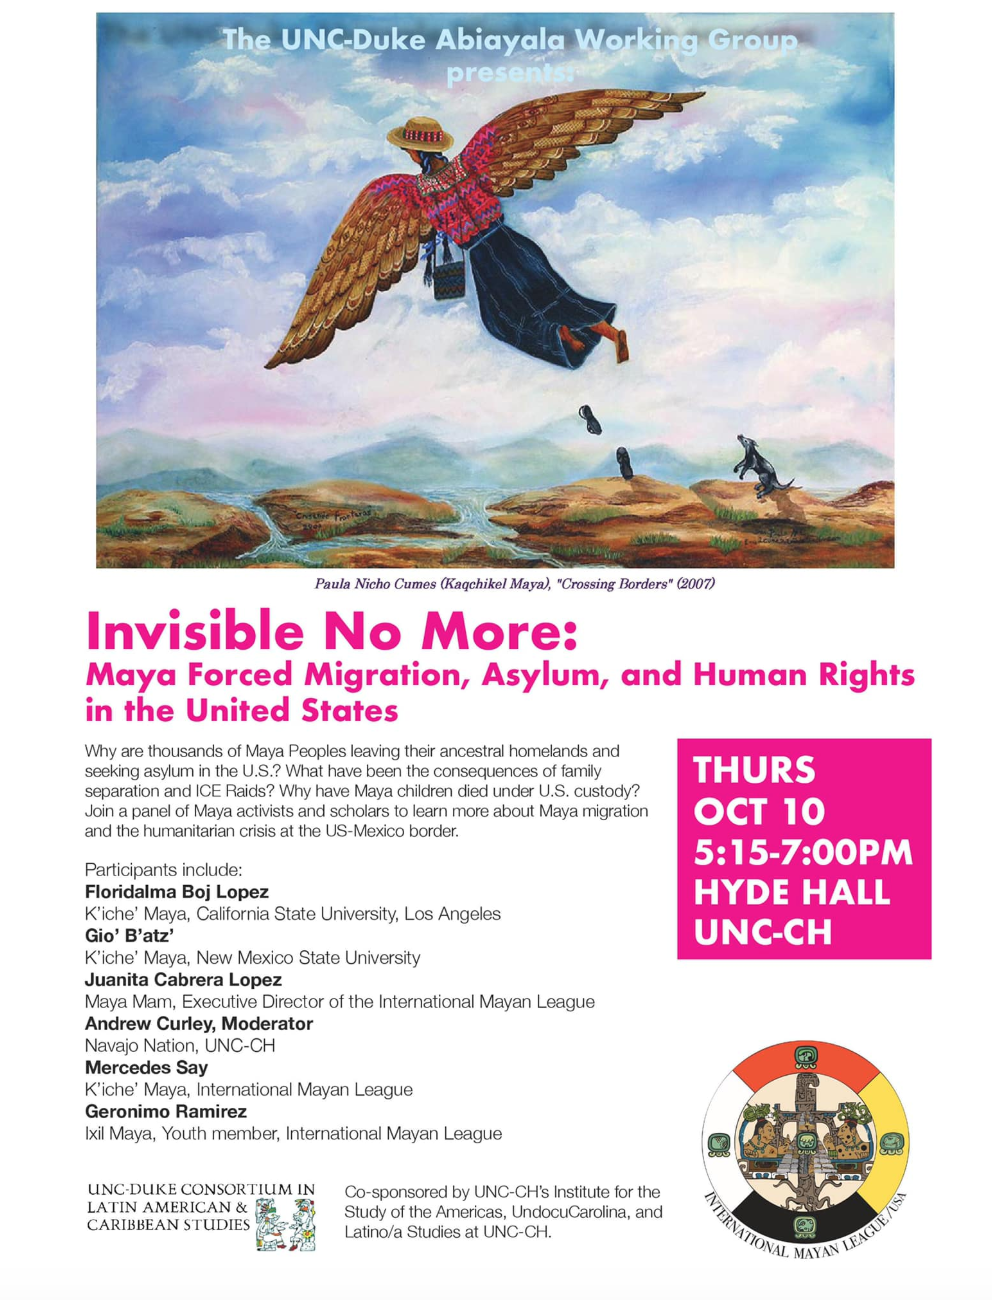 Invisible No More event flyer